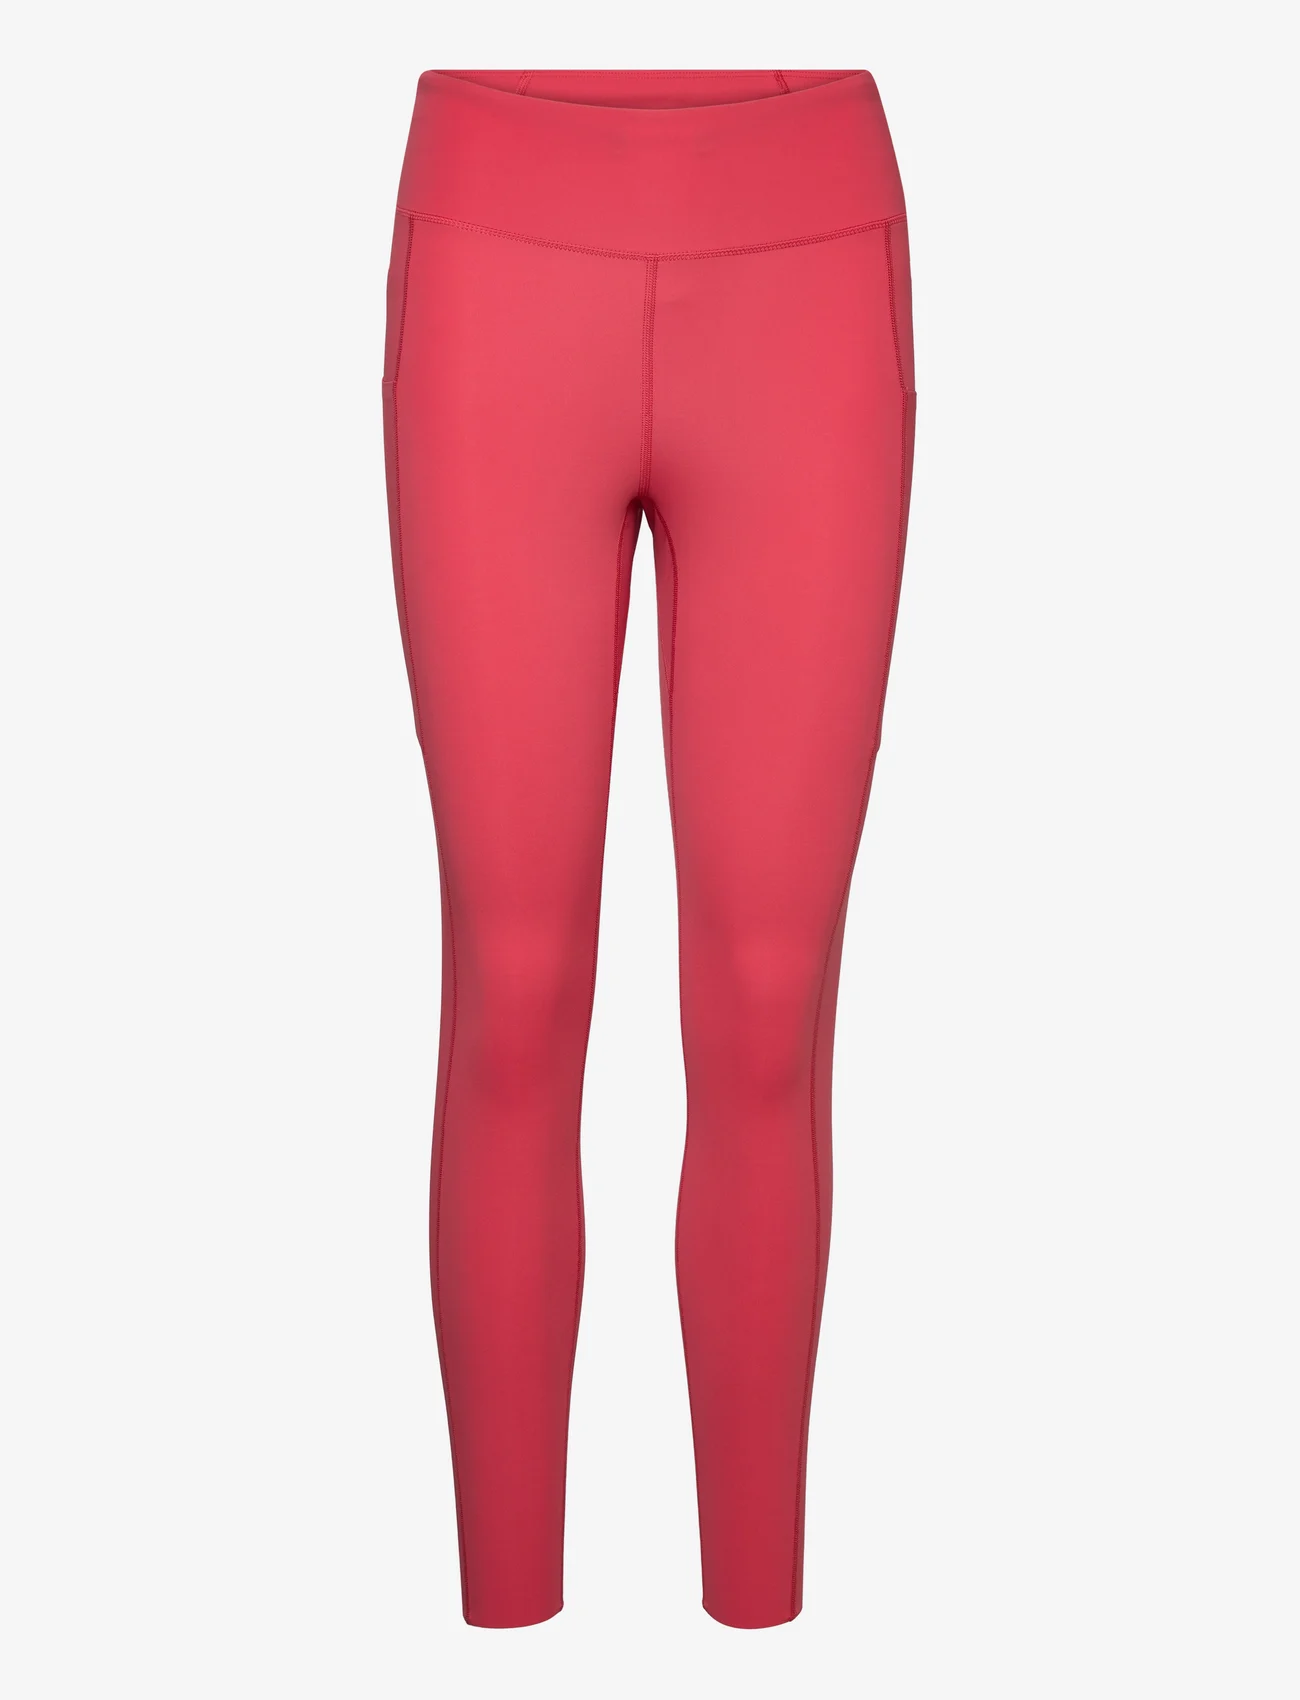 Peak Performance - W Power Tights-SOFTER RED - kompressionsleggings - softer red - 0